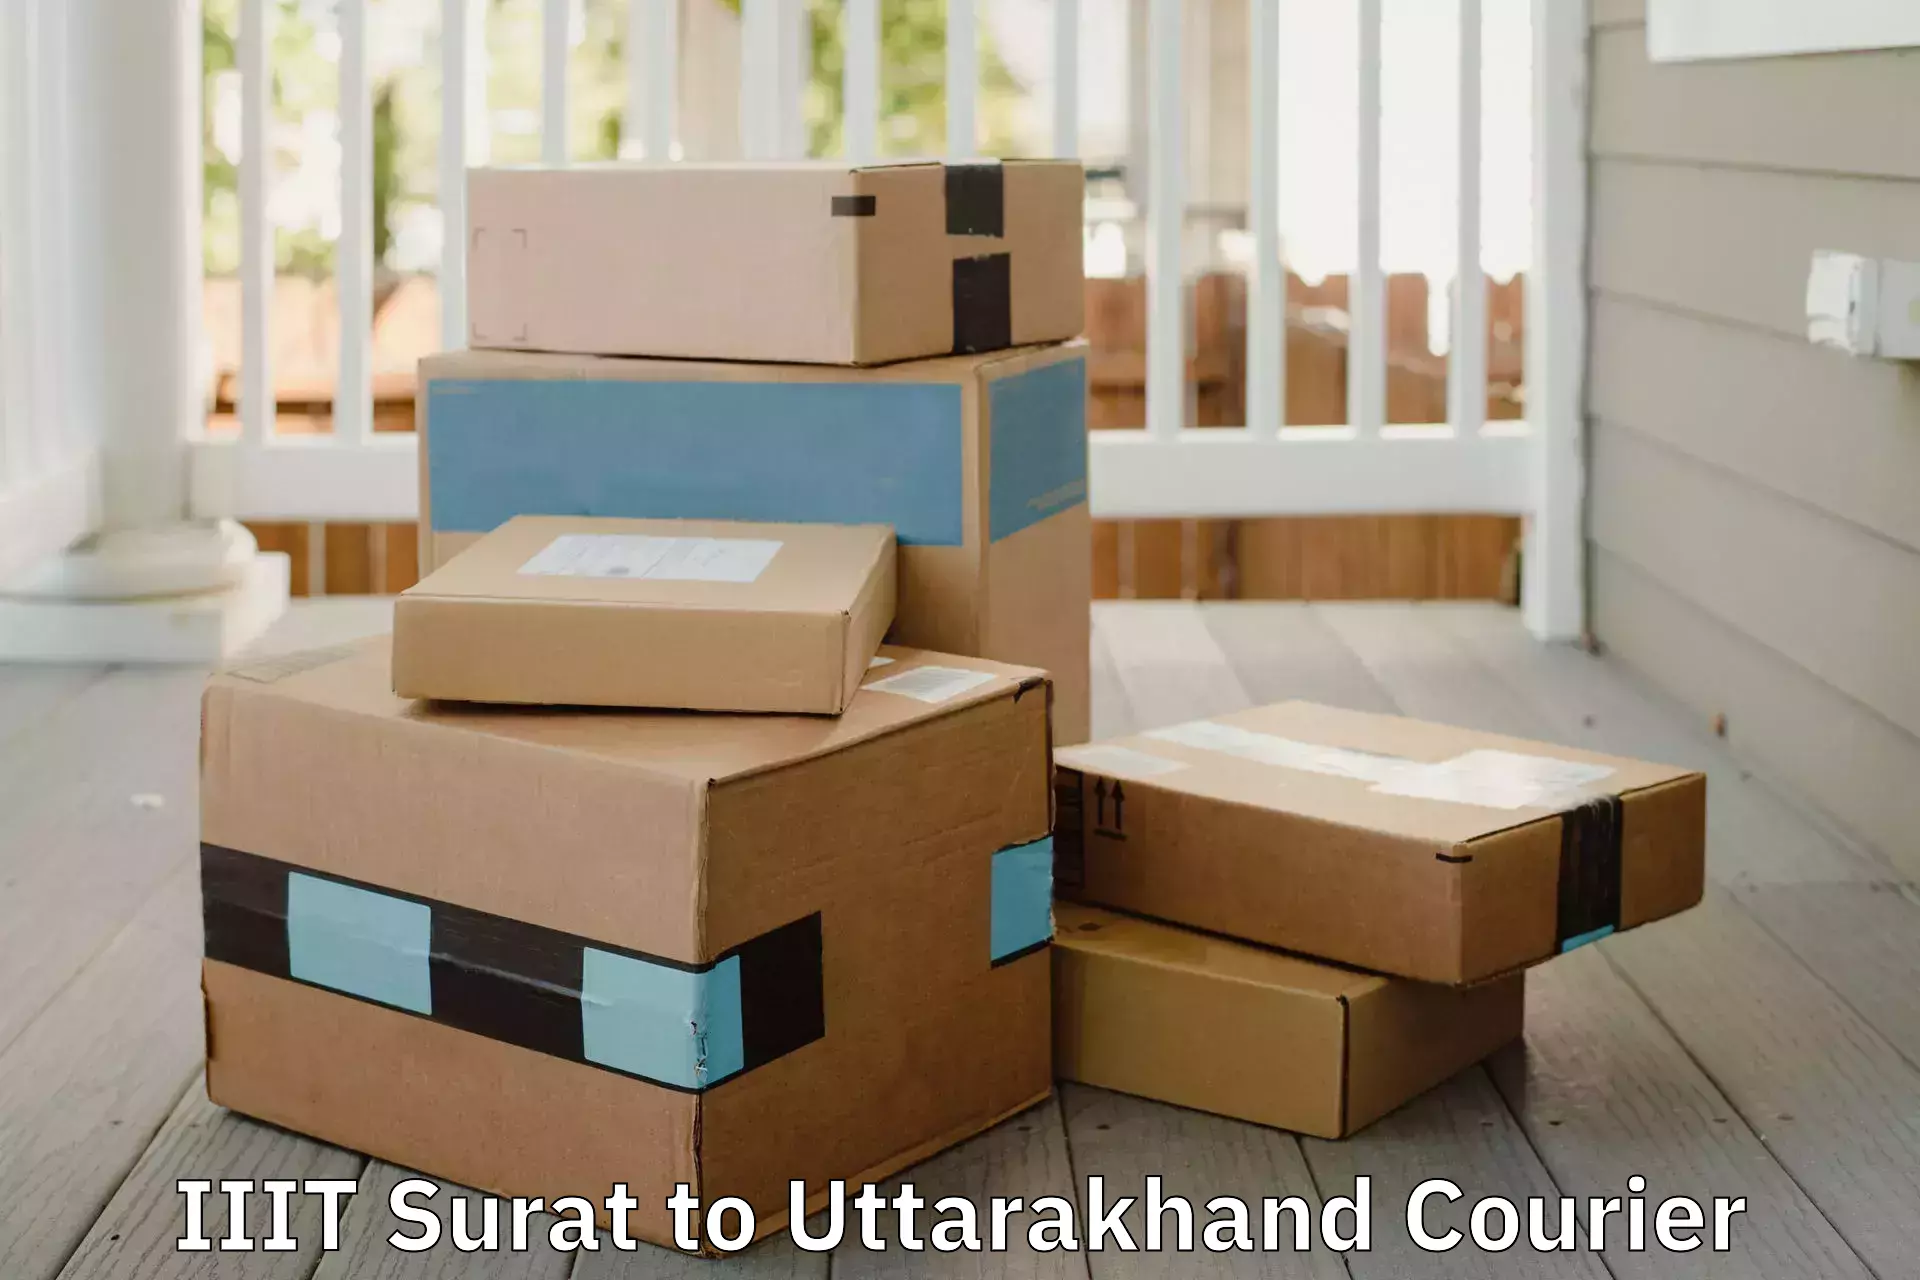 Trusted moving company in IIIT Surat to Gairsain